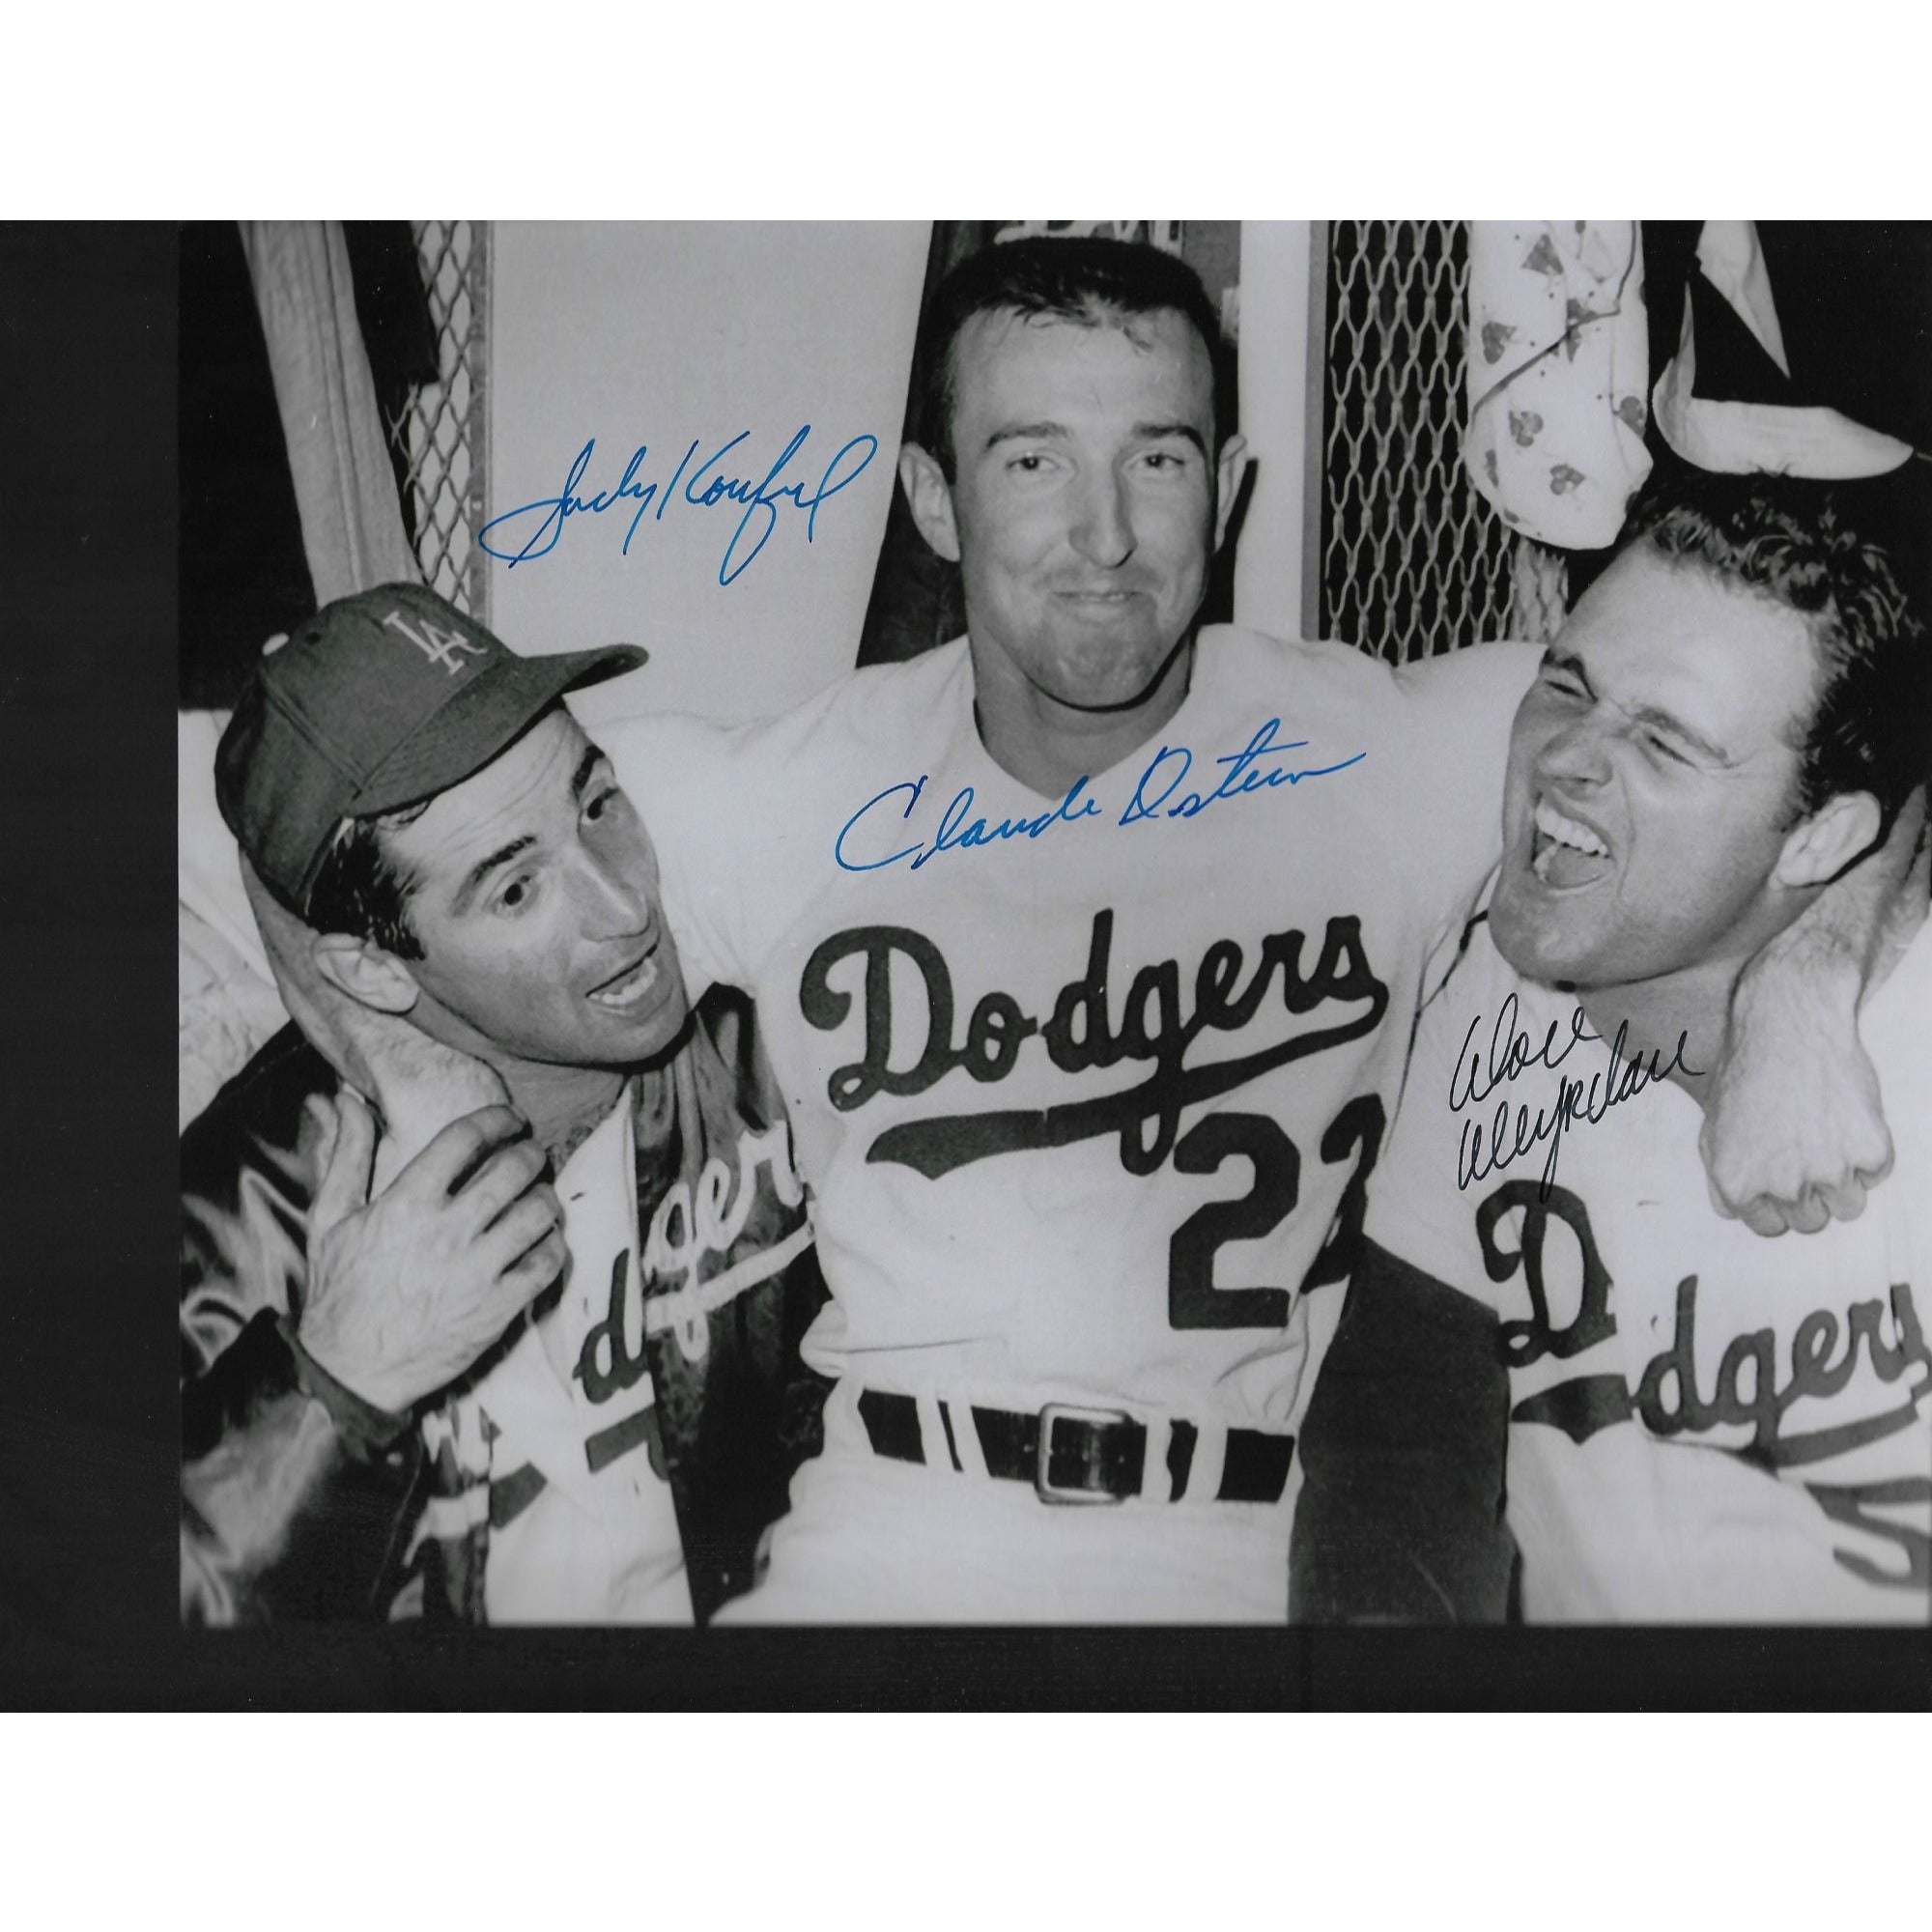 Sandy Koufax, Cloud Osteen and Don Drysdale 8 by 10 signed photo